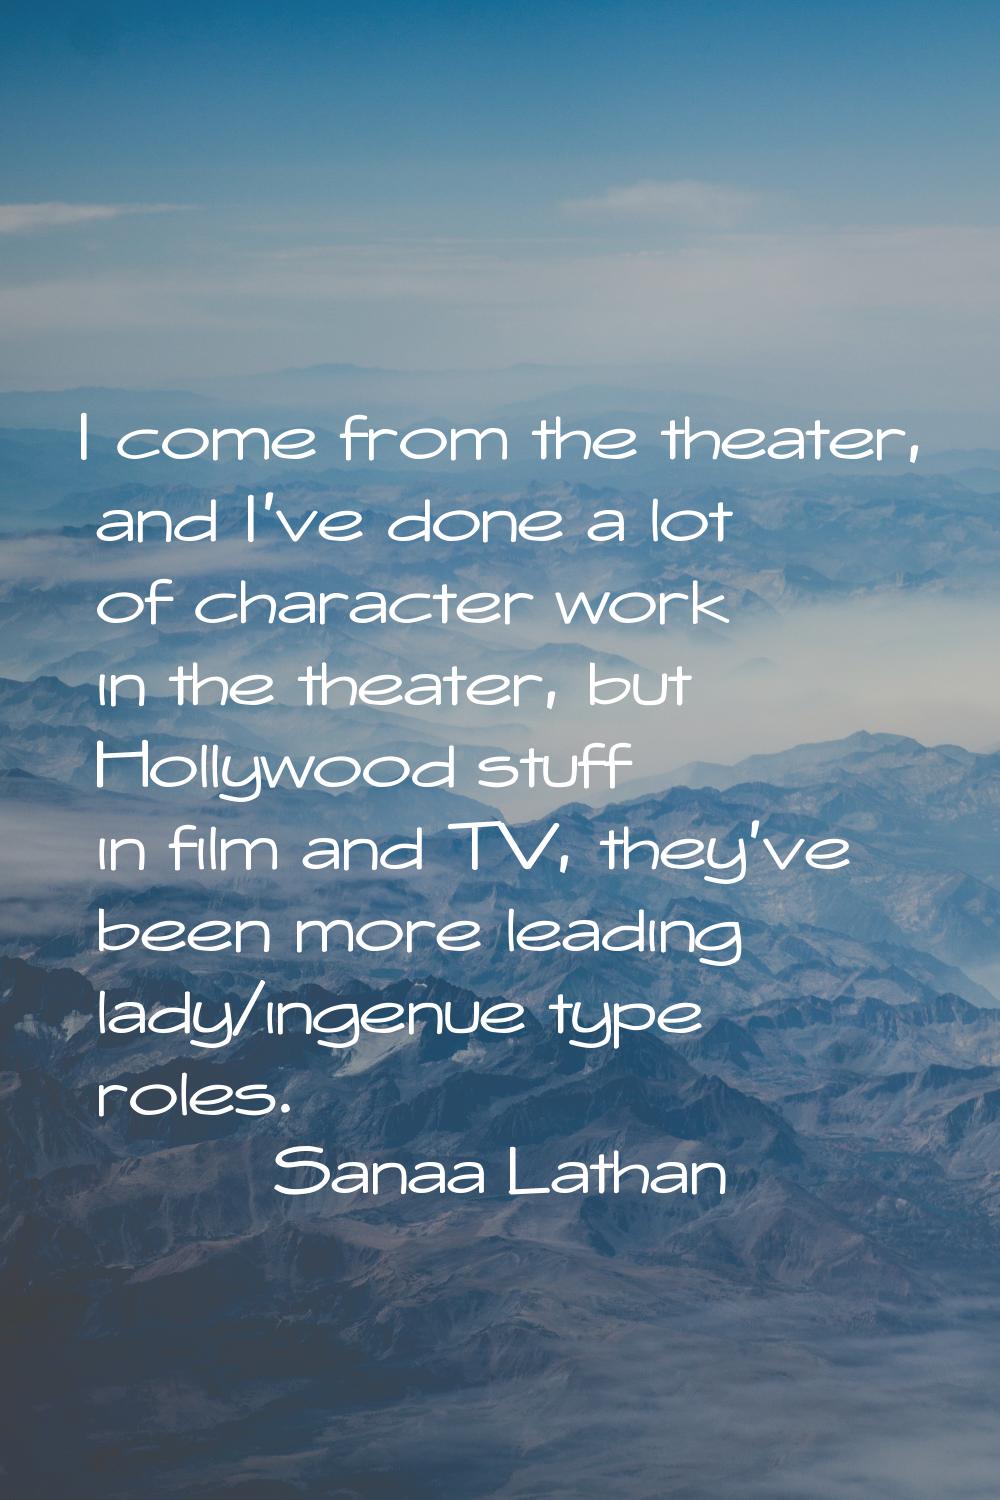 I come from the theater, and I've done a lot of character work in the theater, but Hollywood stuff 